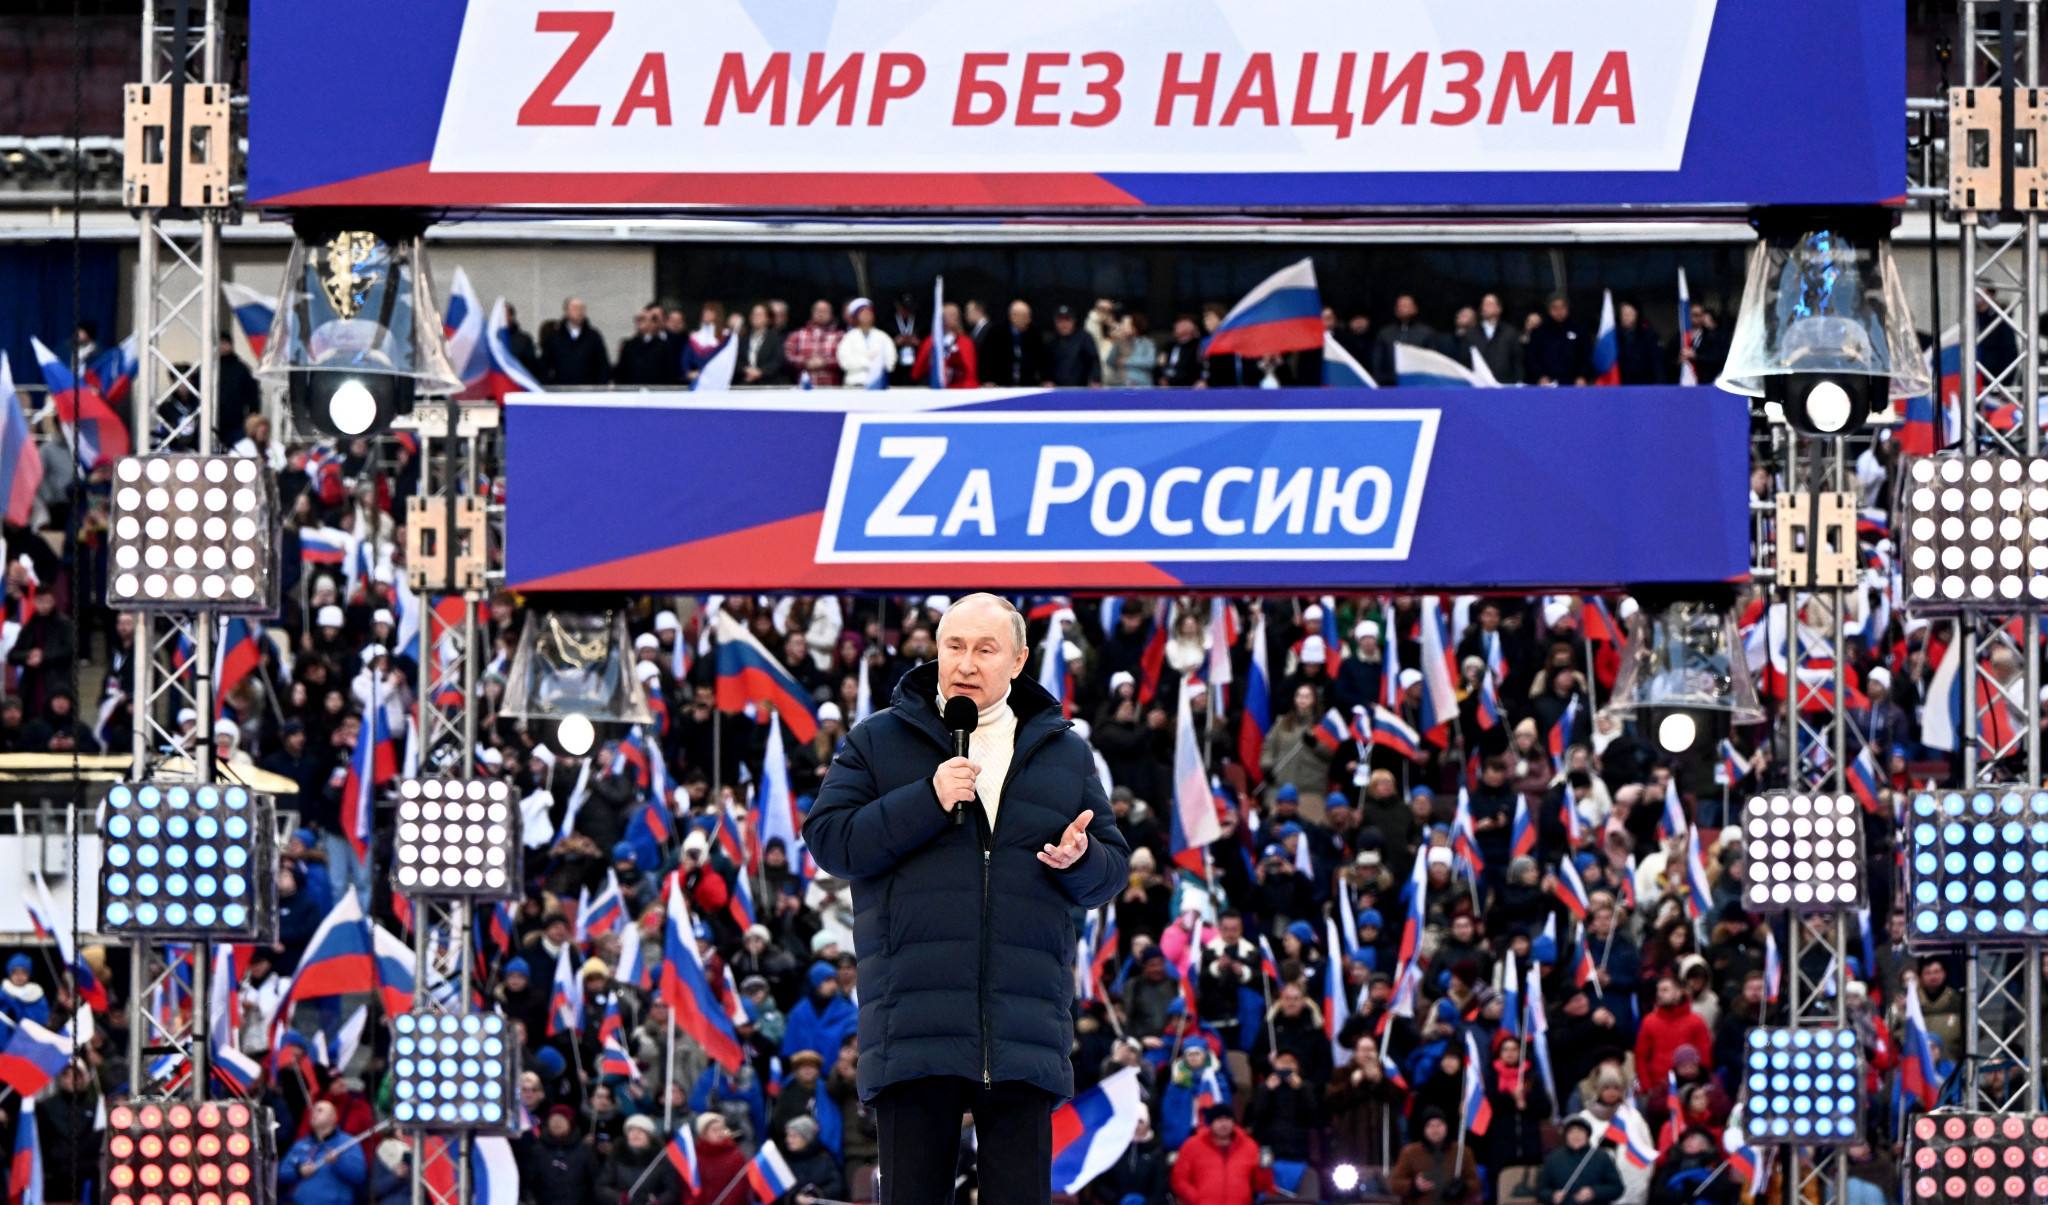 Russian President Vladimir Putin justified the invasion of Ukraine at a political rally at the Luzhniki Stadium on March 18 ©Getty Images